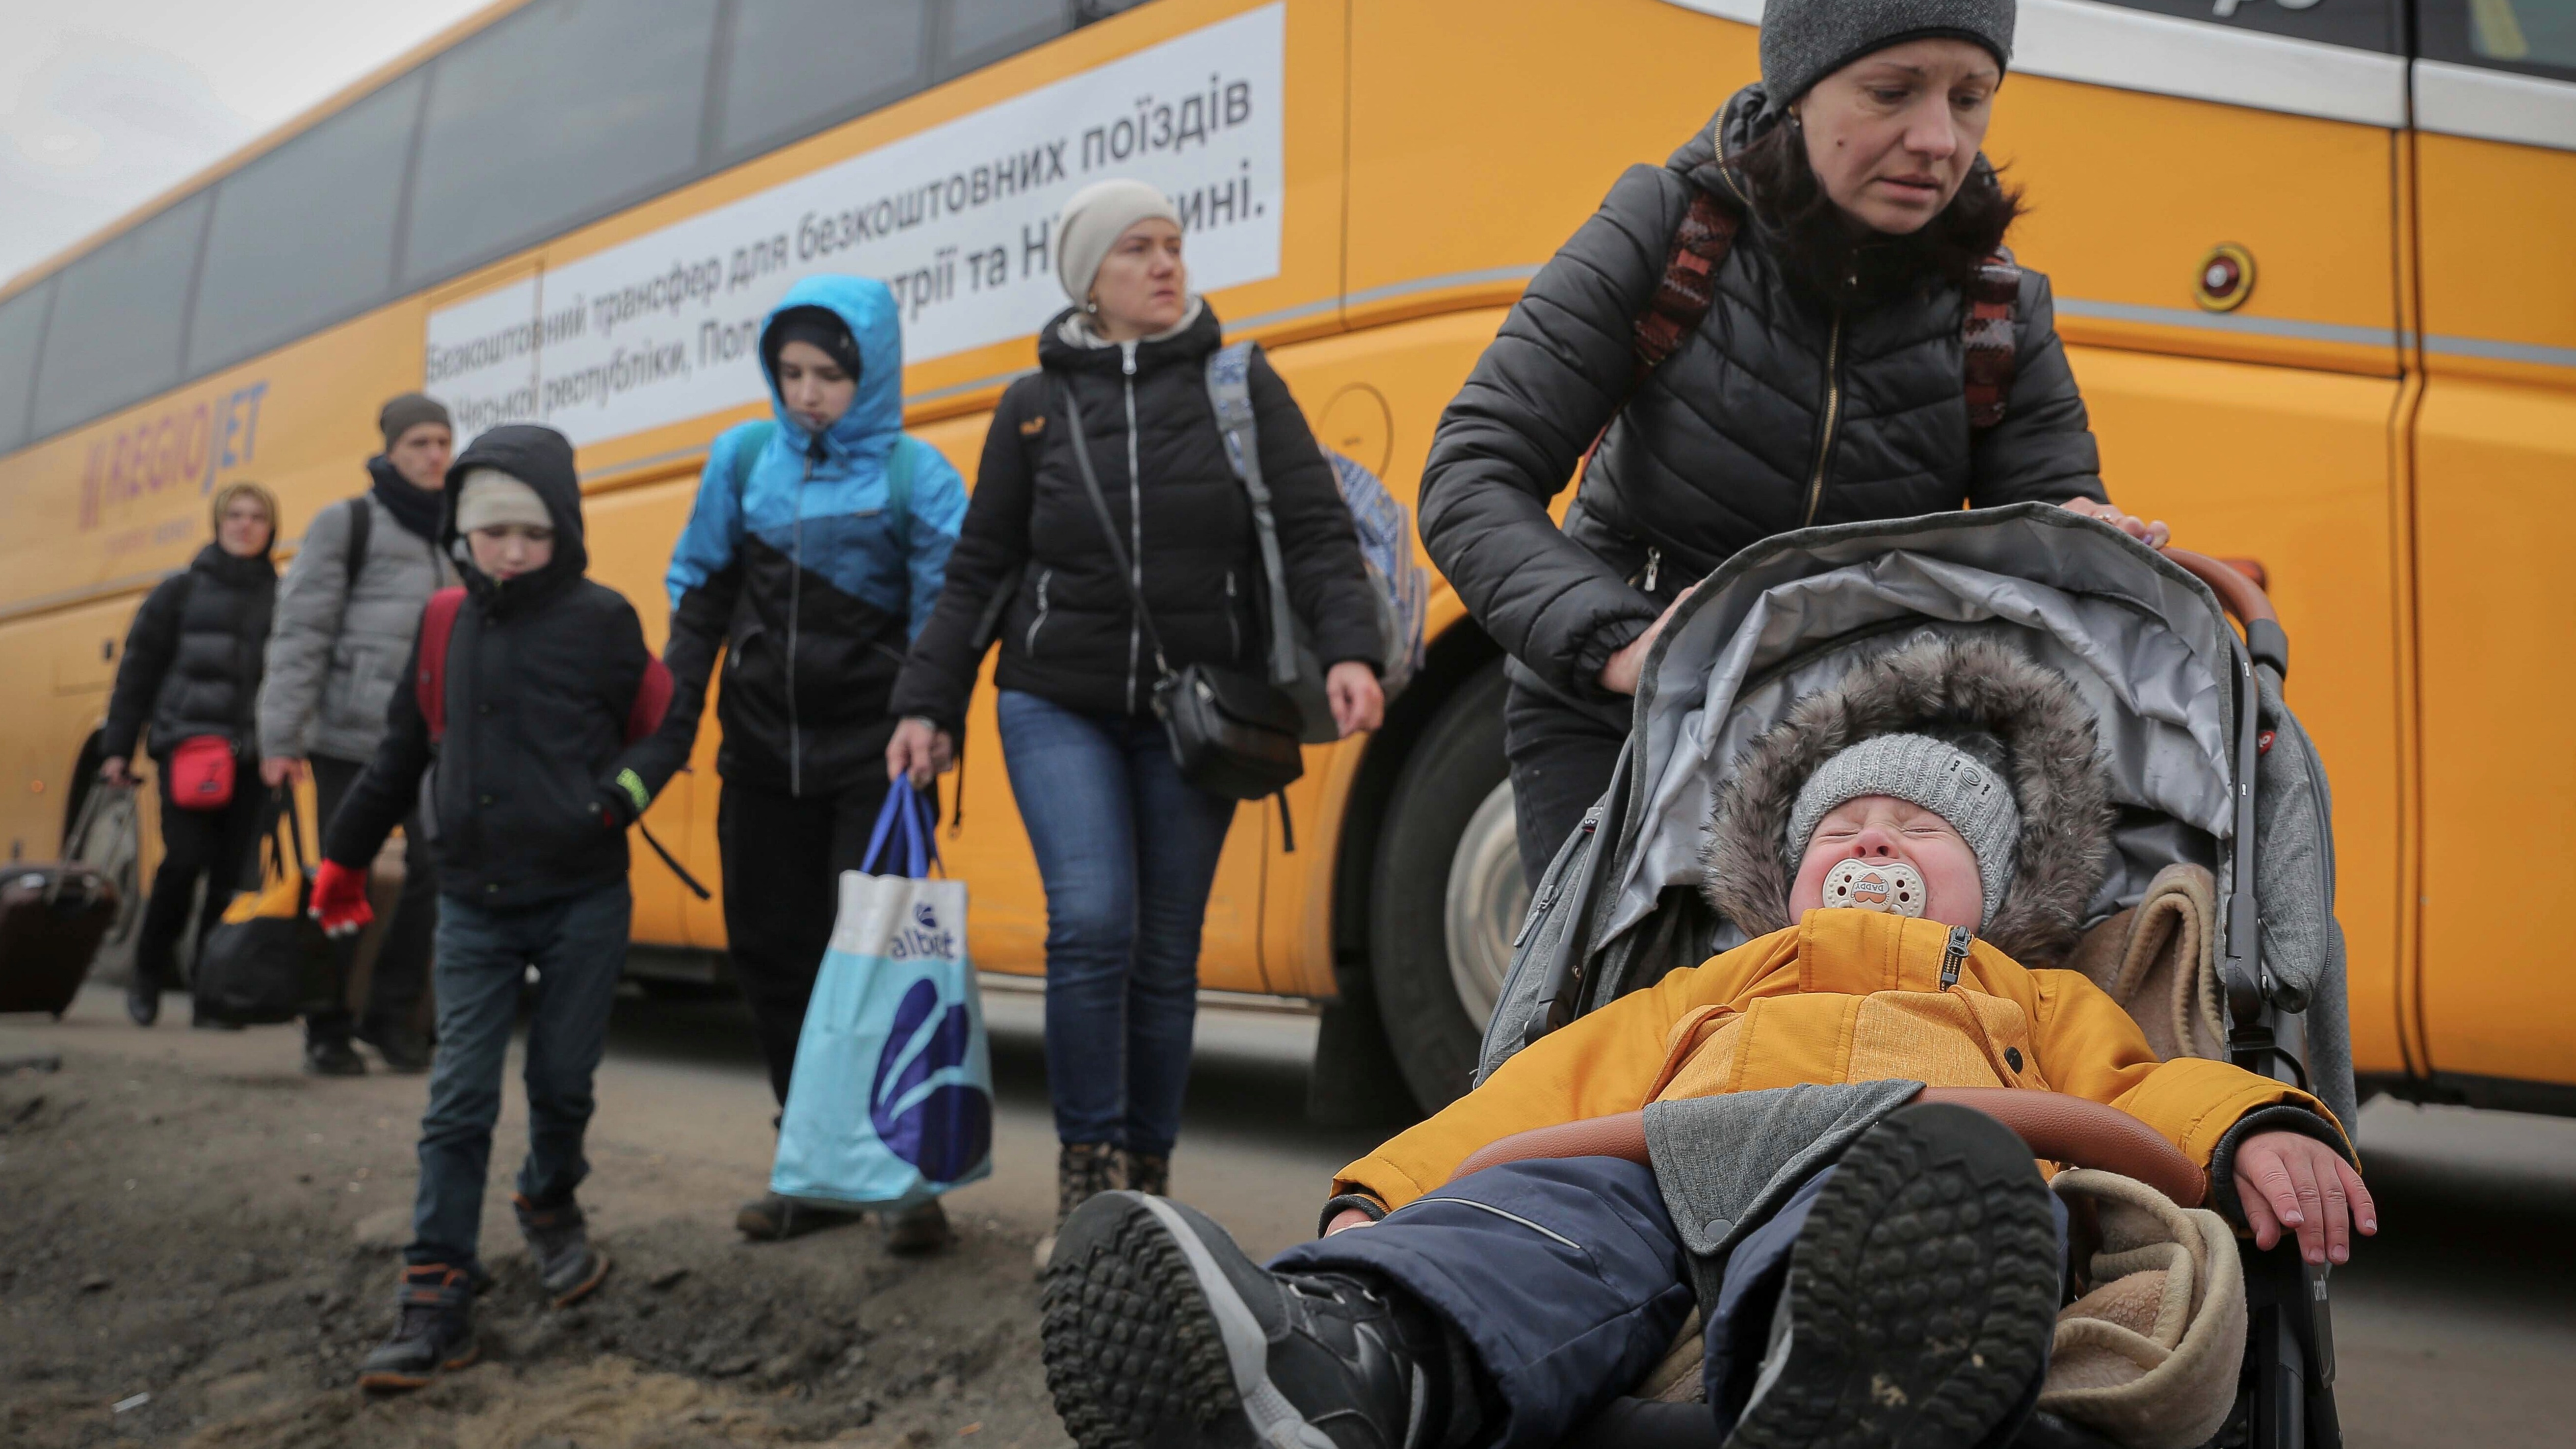 Ukrainian refugees can stay in the UK for three years after government